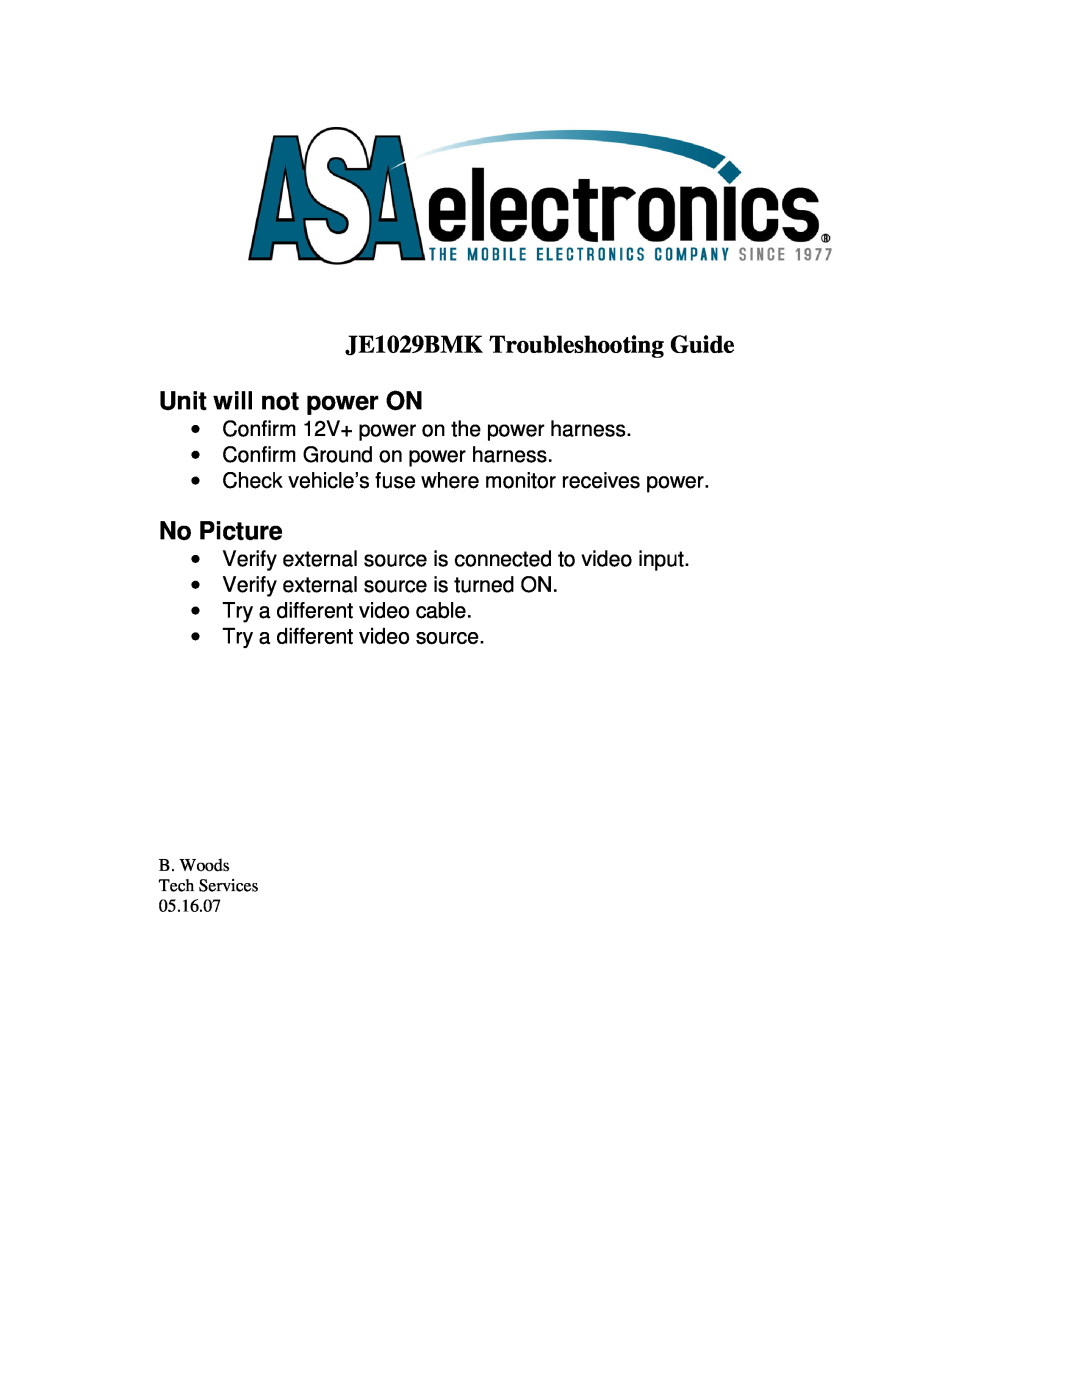 ASA Electronics manual JE1029BMK Troubleshooting Guide, Unit will not power ON, No Picture, B. Woods Tech Services 